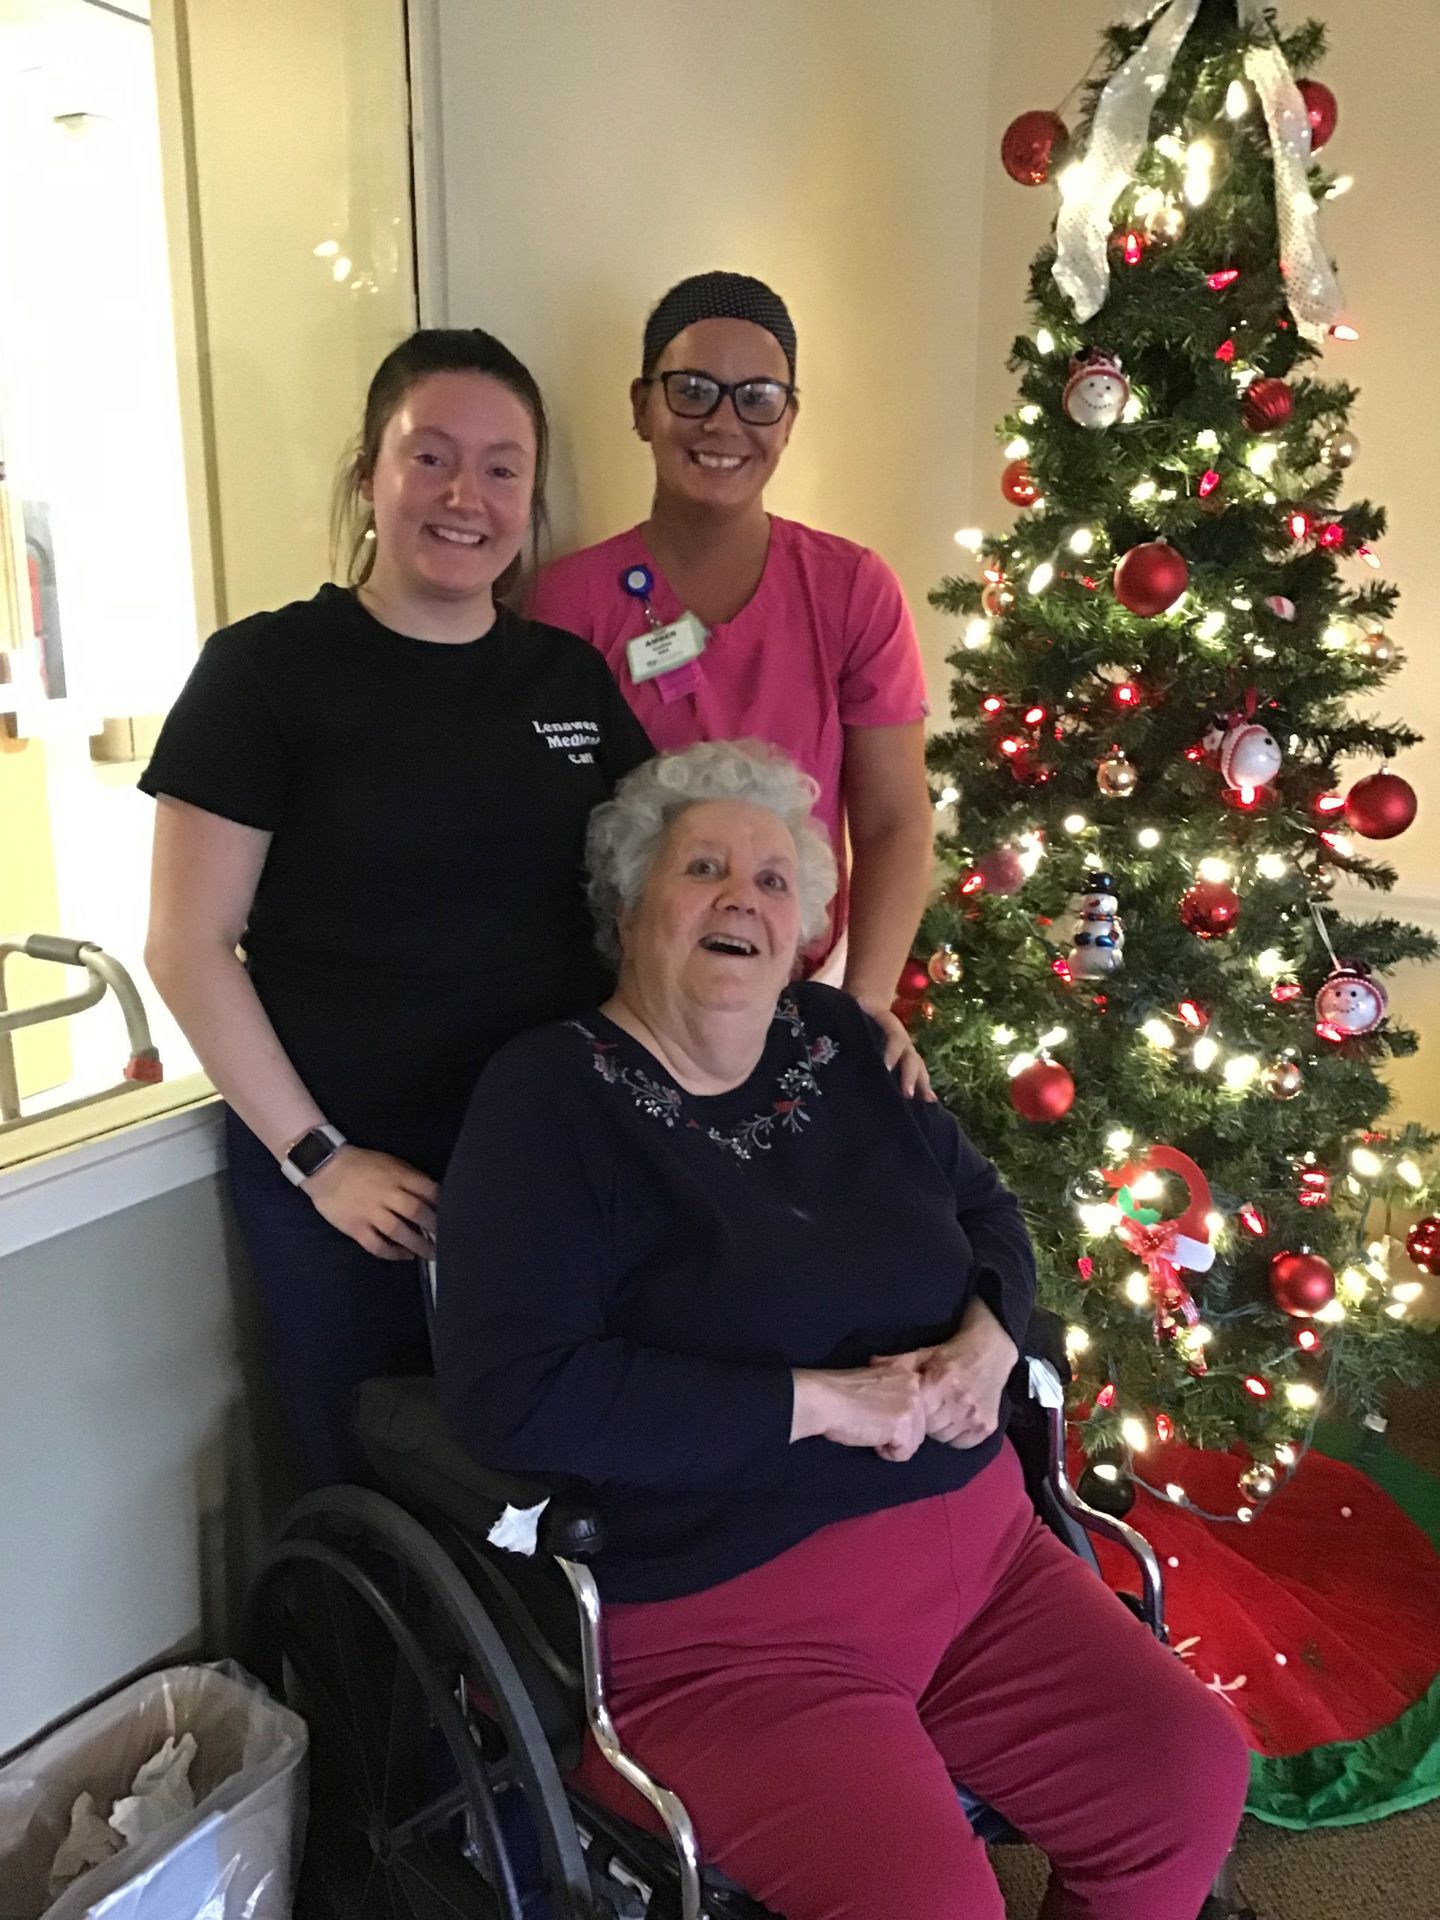 Elder posing with staff by Christmas tree at Lenawee Medical Care Facility in Adrian, MI